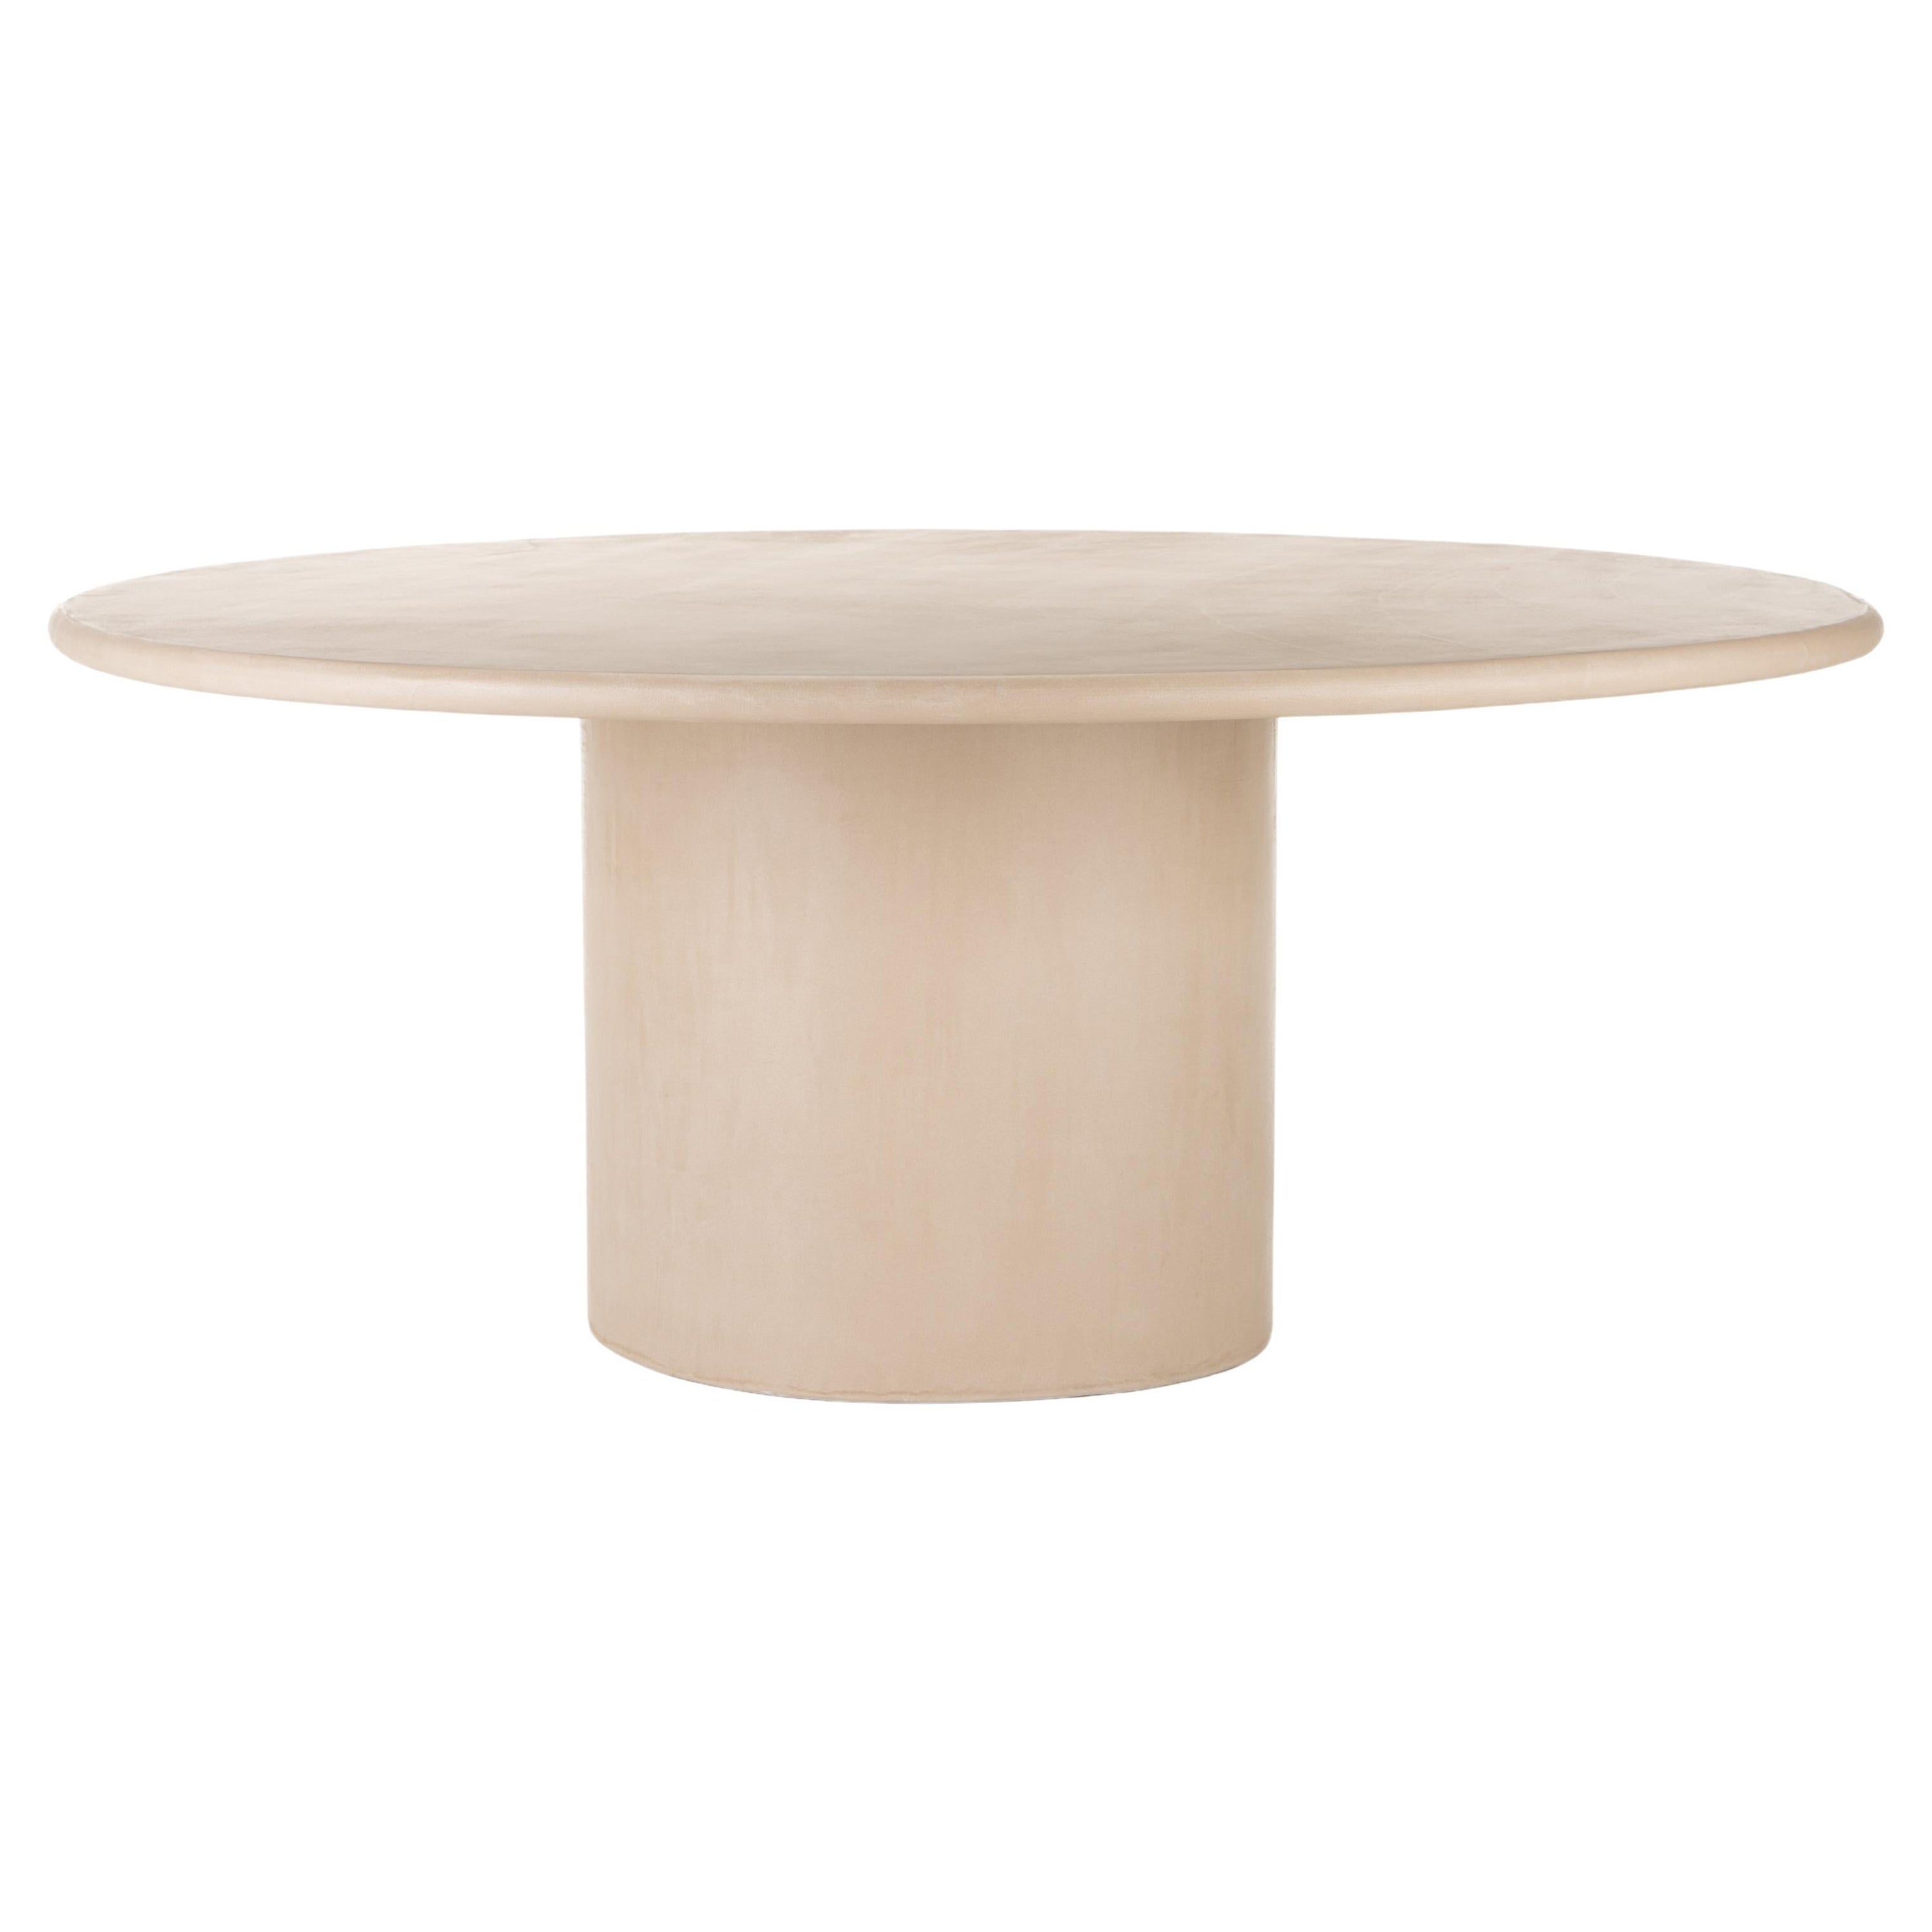 Natural Plaster Dining Table "Sami" 130 by Isabelle Beaumont For Sale